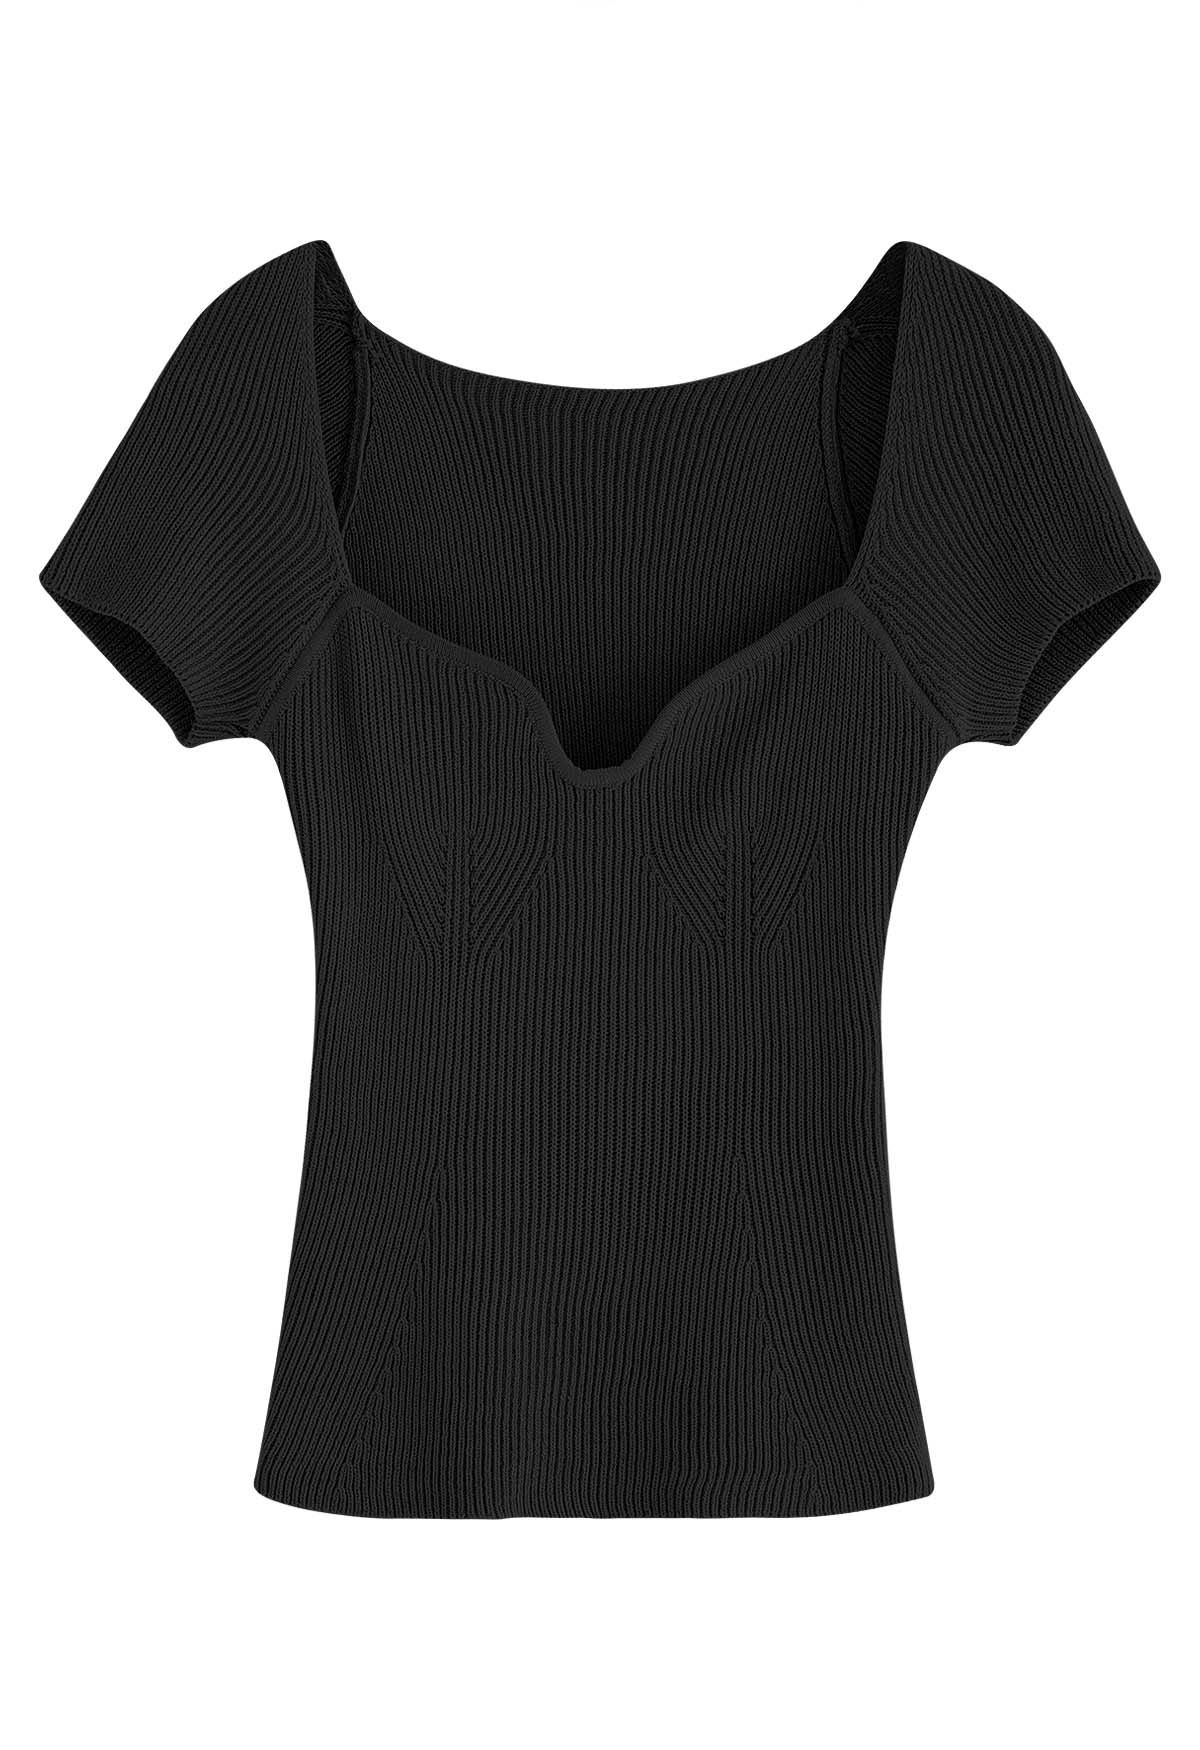 U-Shape Wide Collar Fitted Knit Top in Black